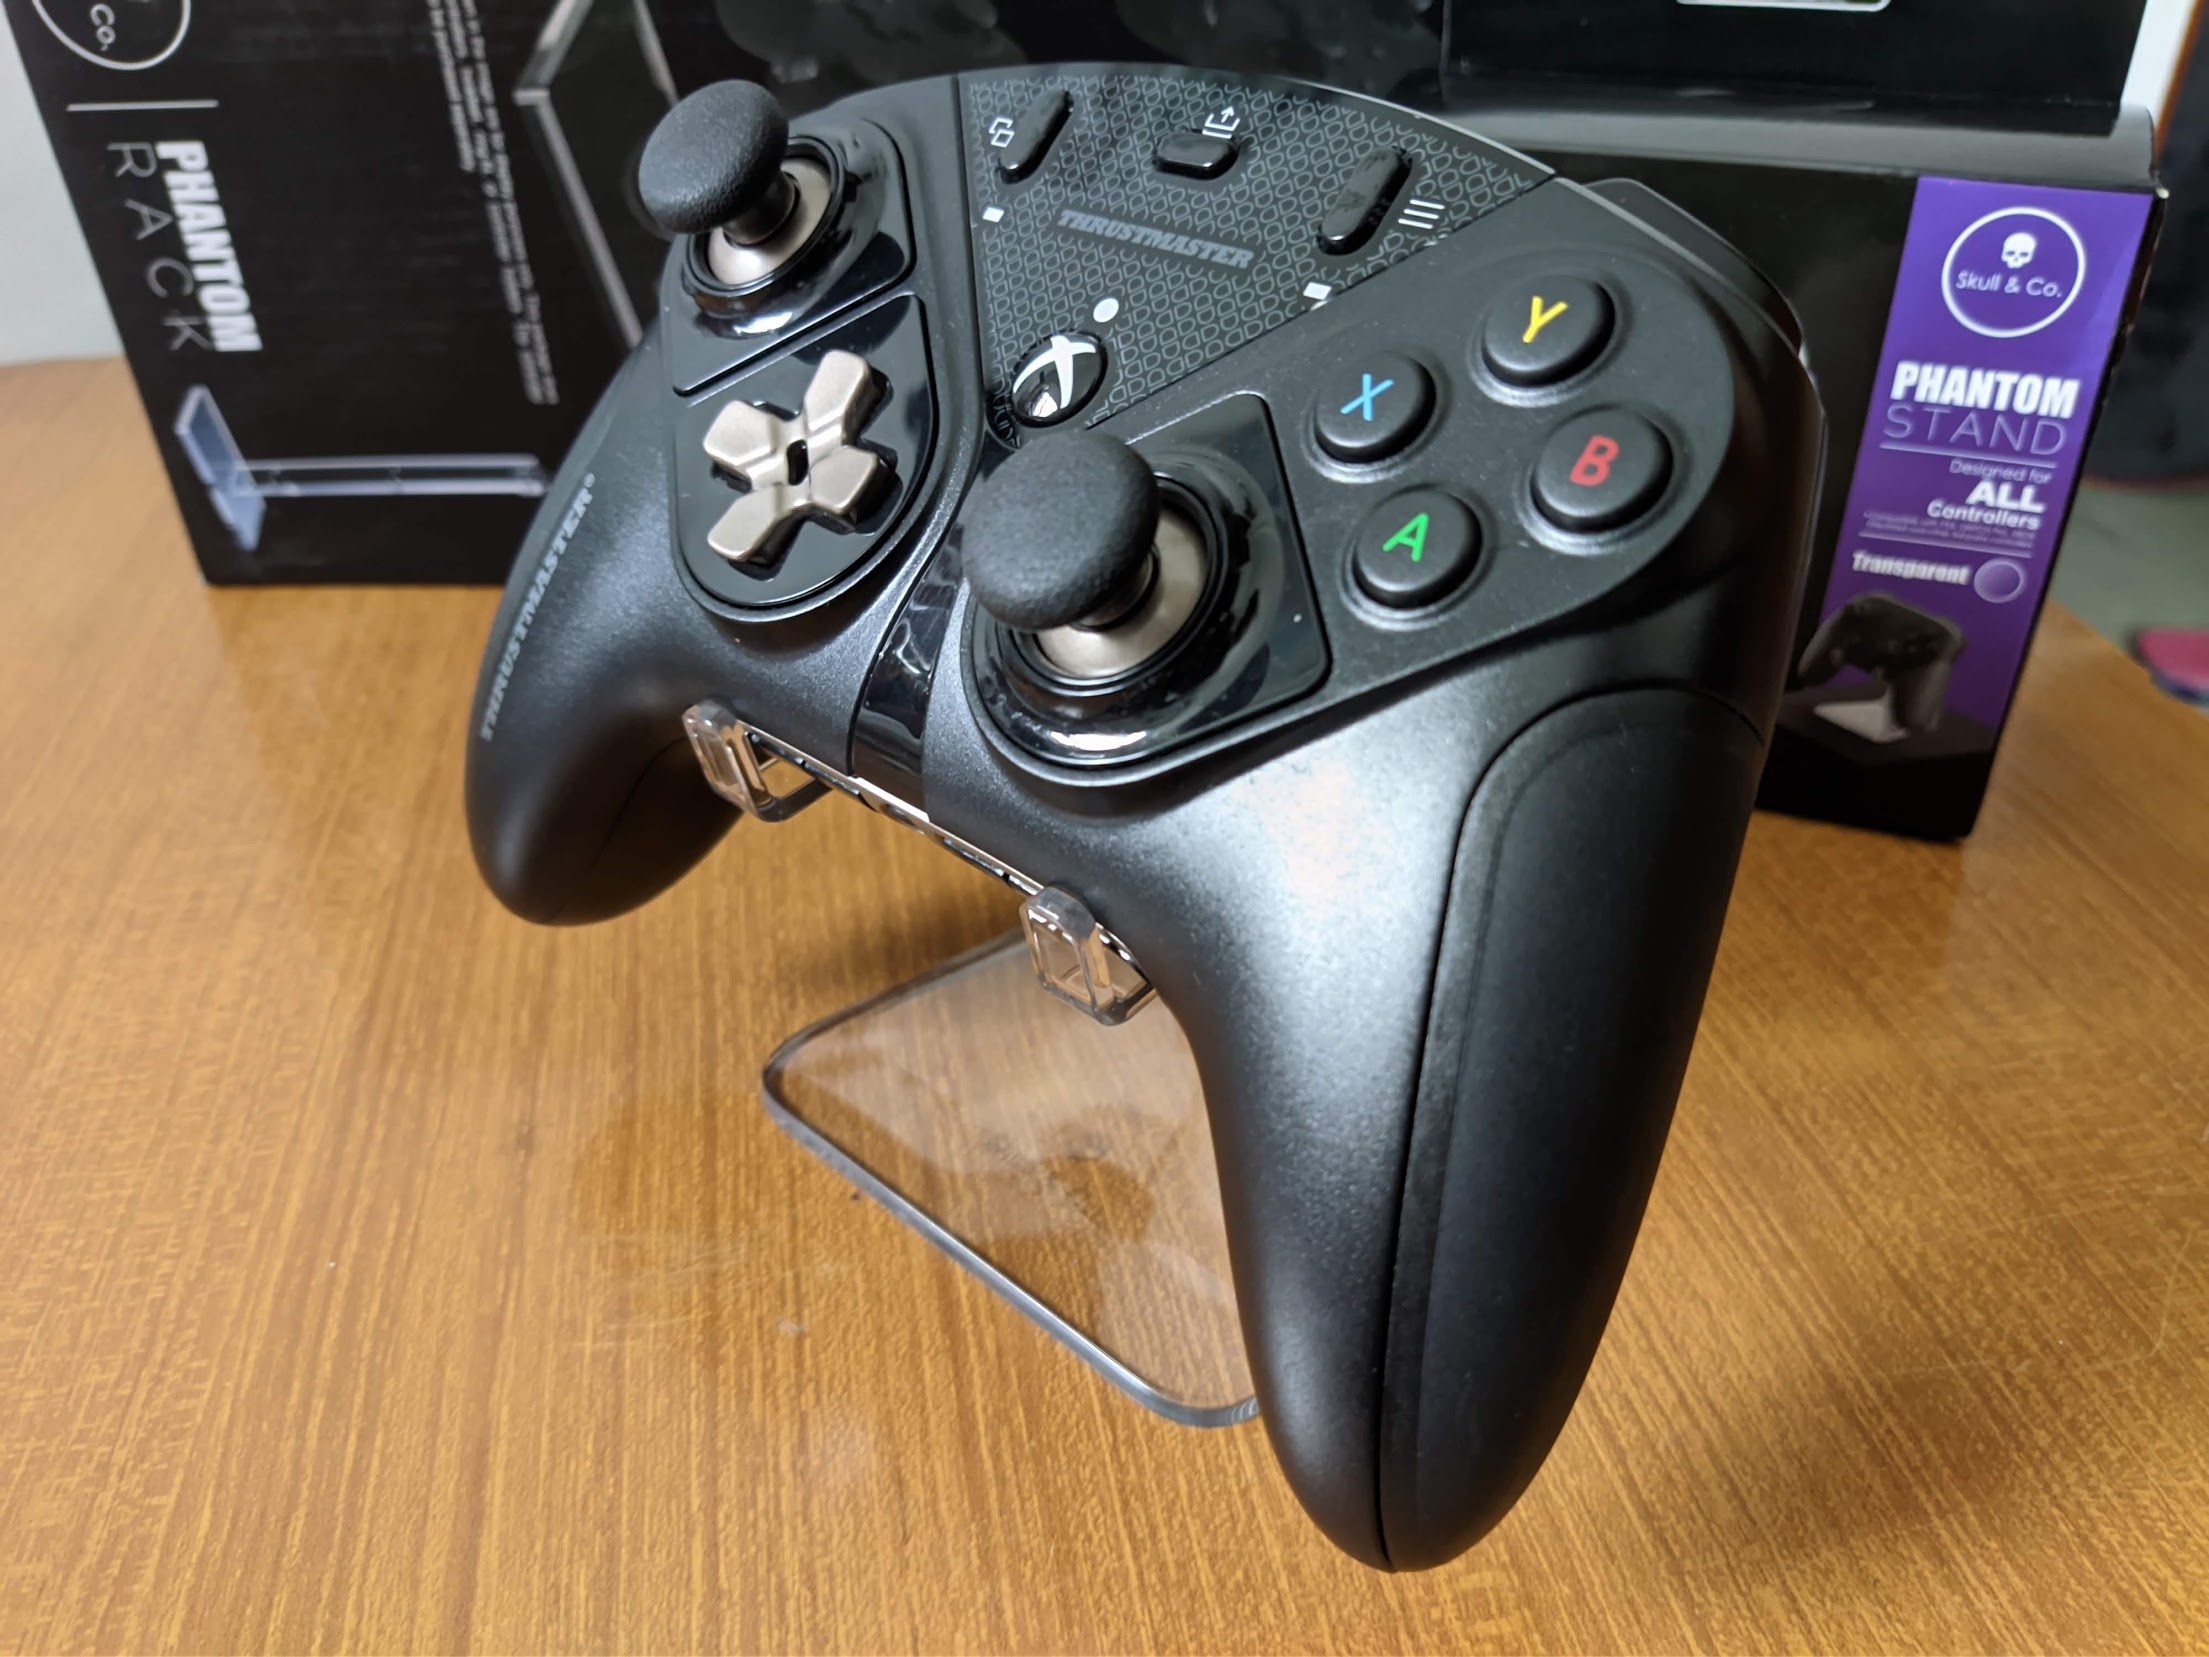 controller on stand.jpg